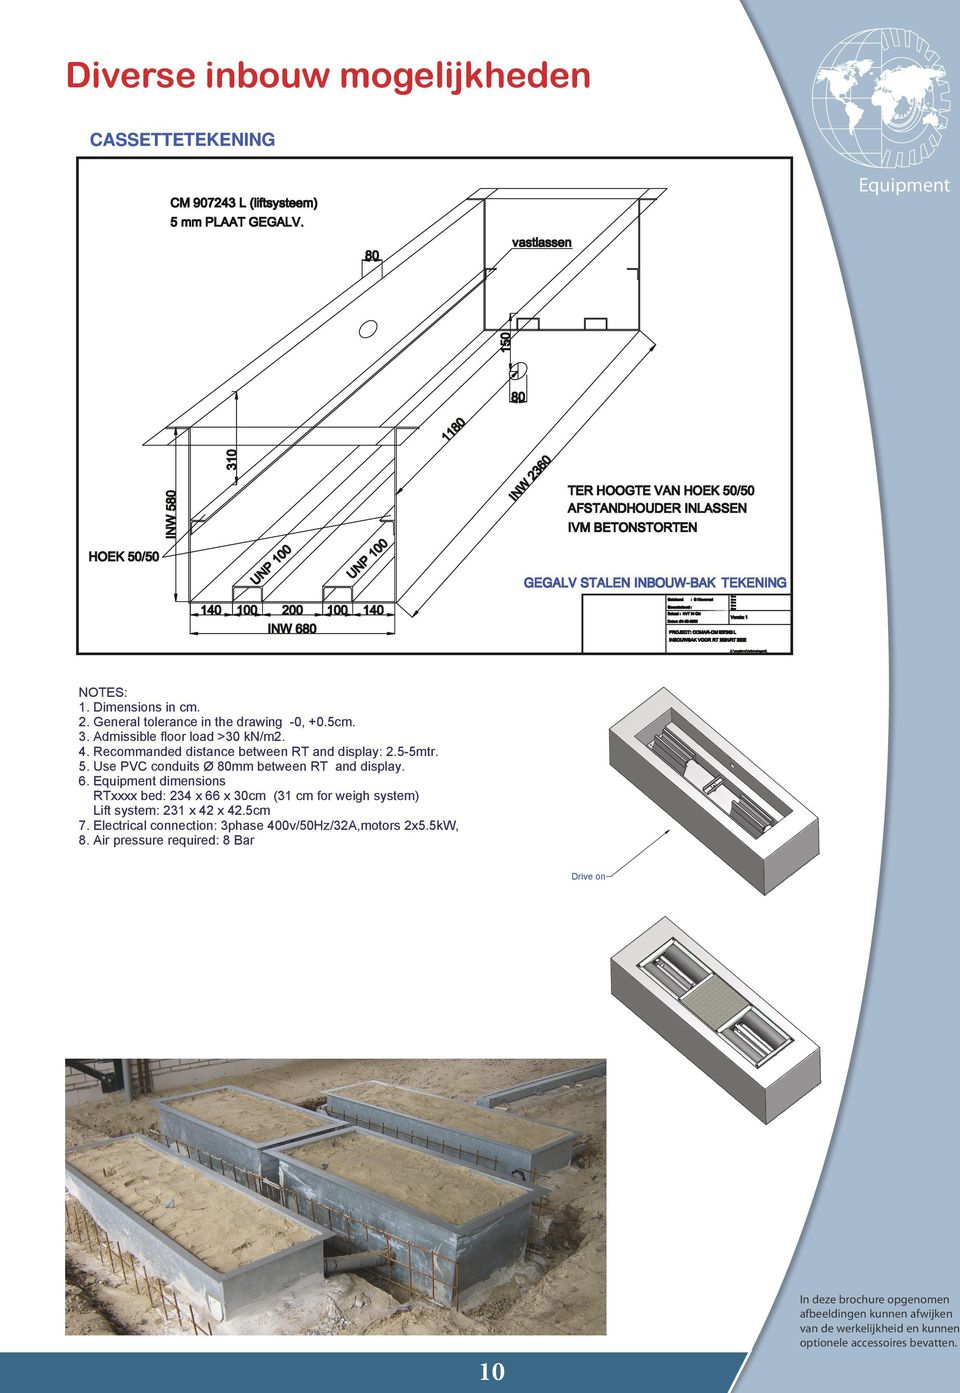 dimensions Flat support RTxxxx bed: 24 x 66 x 0cm ( cm for weigh system) Lift system: 2 x 42 x 42.5cm 7. Electrical connection: phase 400v/50Hz/2A,motors 2x5.5kW, 8.